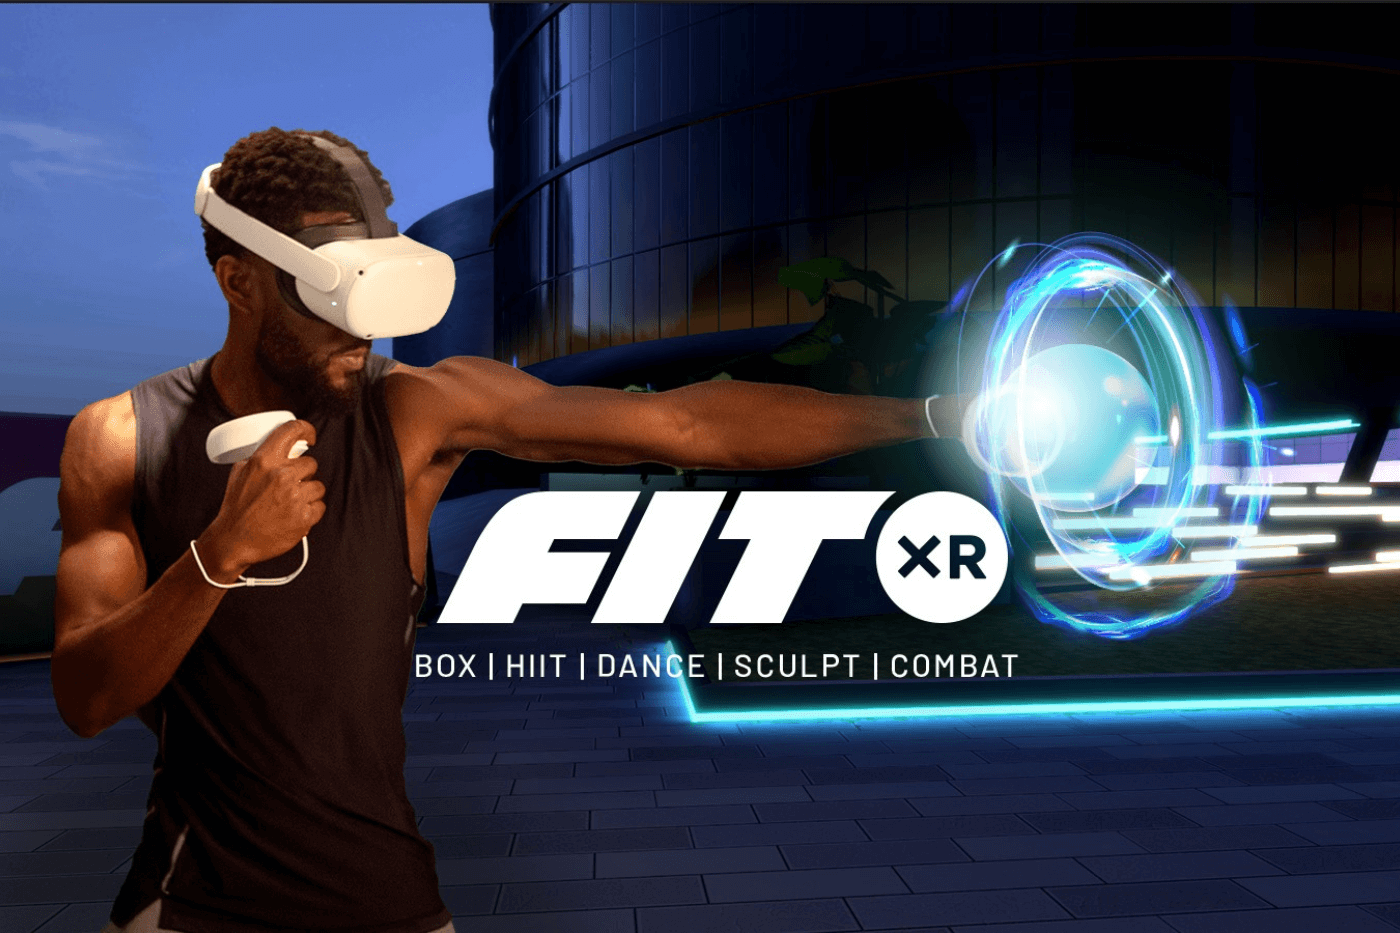 FitXR Workout Classes - New Pop Music Collection to Add Variety to Your VR Fitness Routine